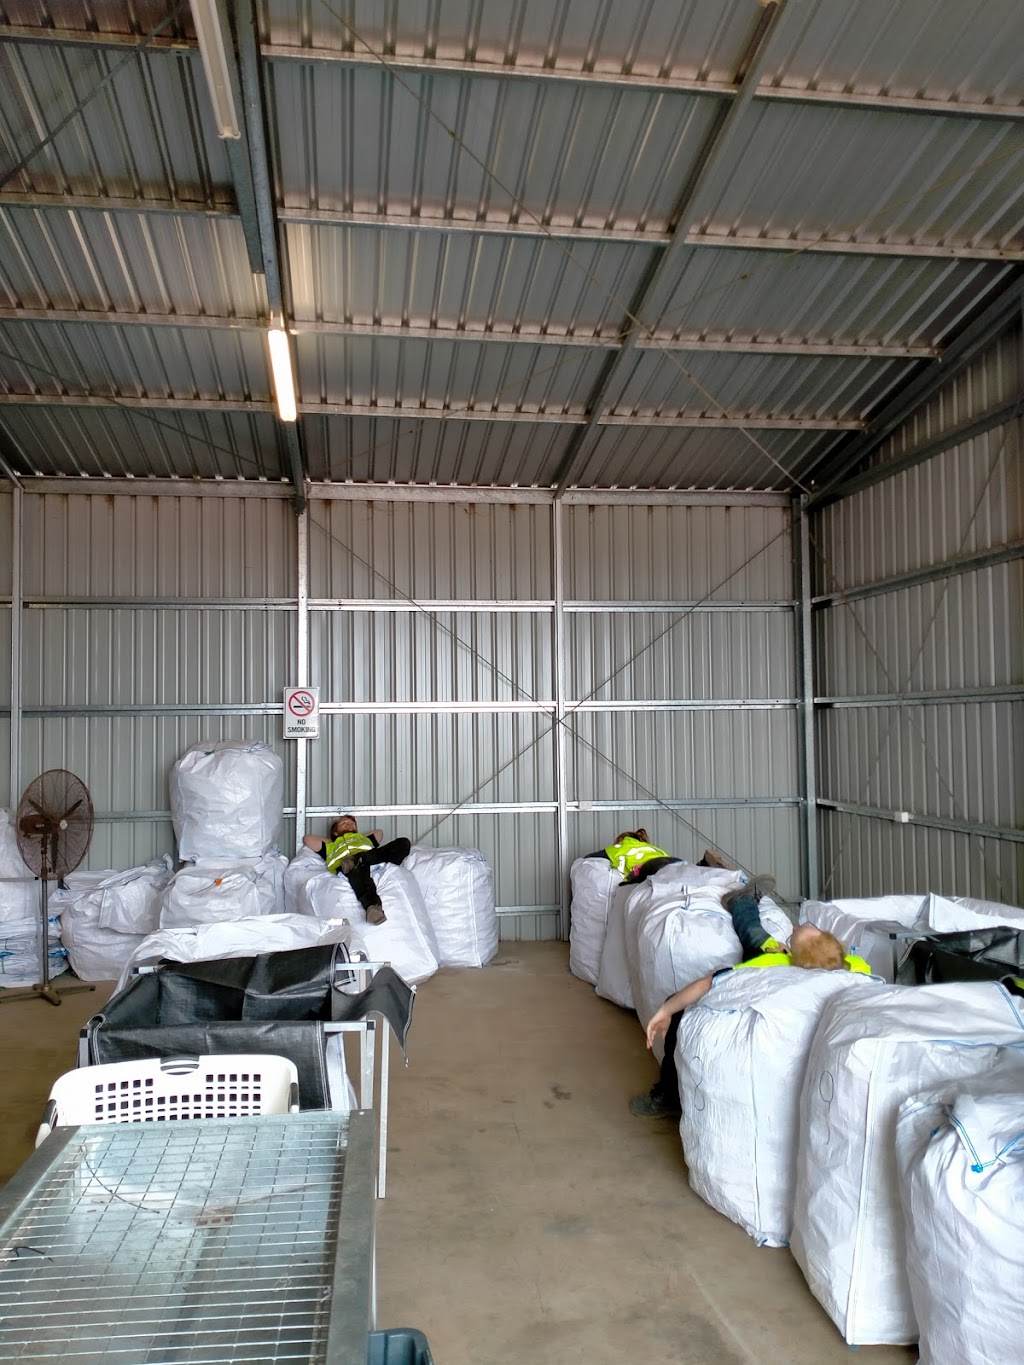 Avonvalley Cash for Containers | 51 Old York Rd, Northam WA 6401, Australia | Phone: 0409 473 388